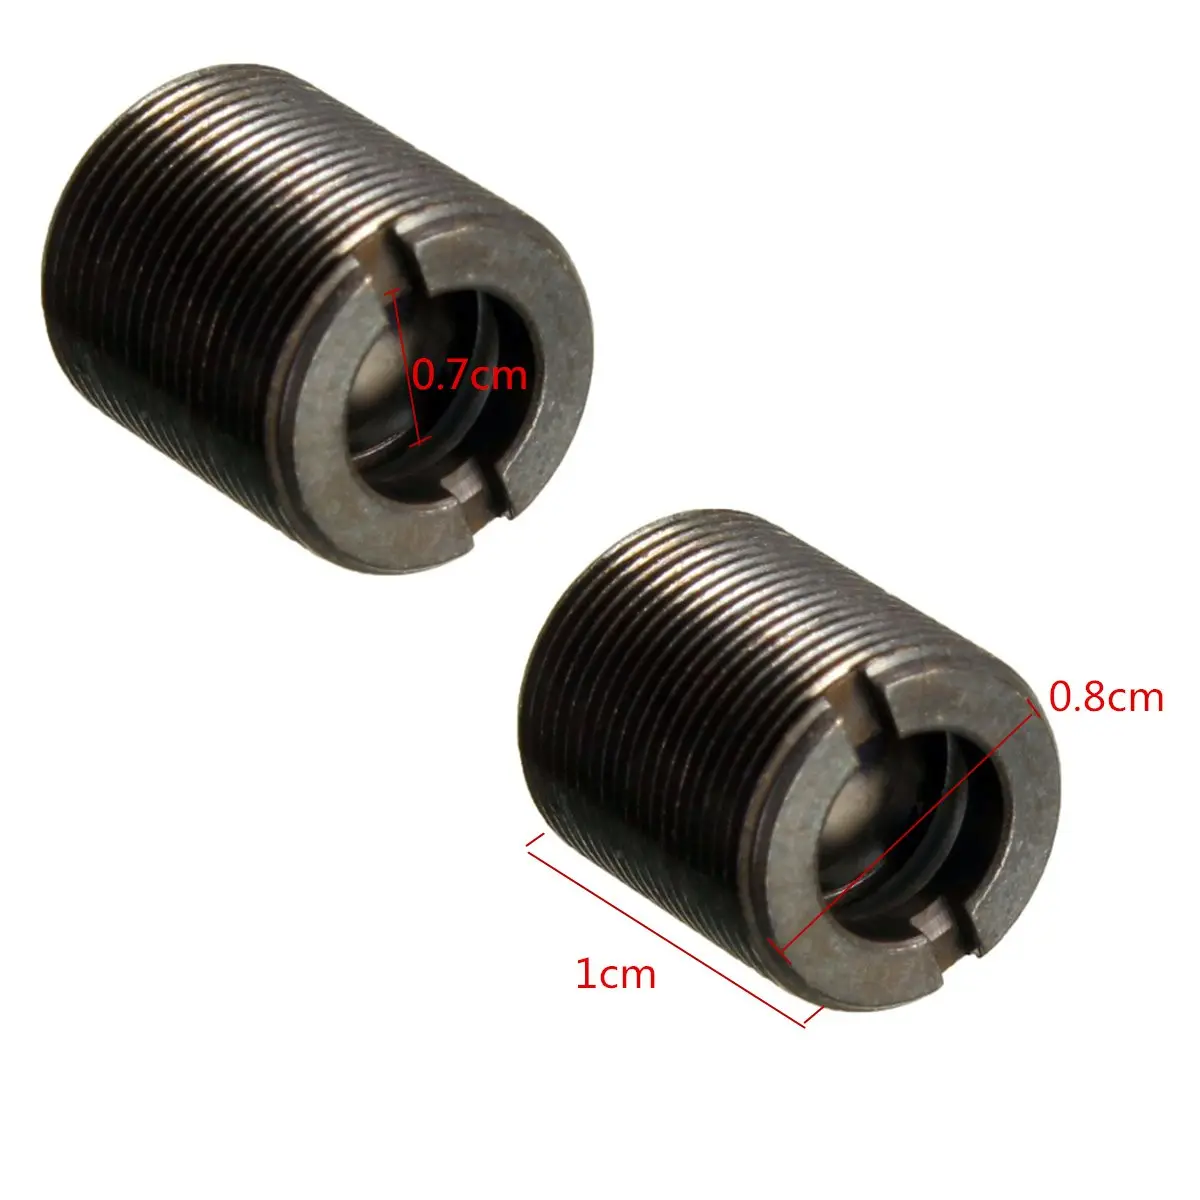 Triple Glazing Focusing Lens Collimating Coated Glass Lens Blue Laser Diode 405nm-450nm